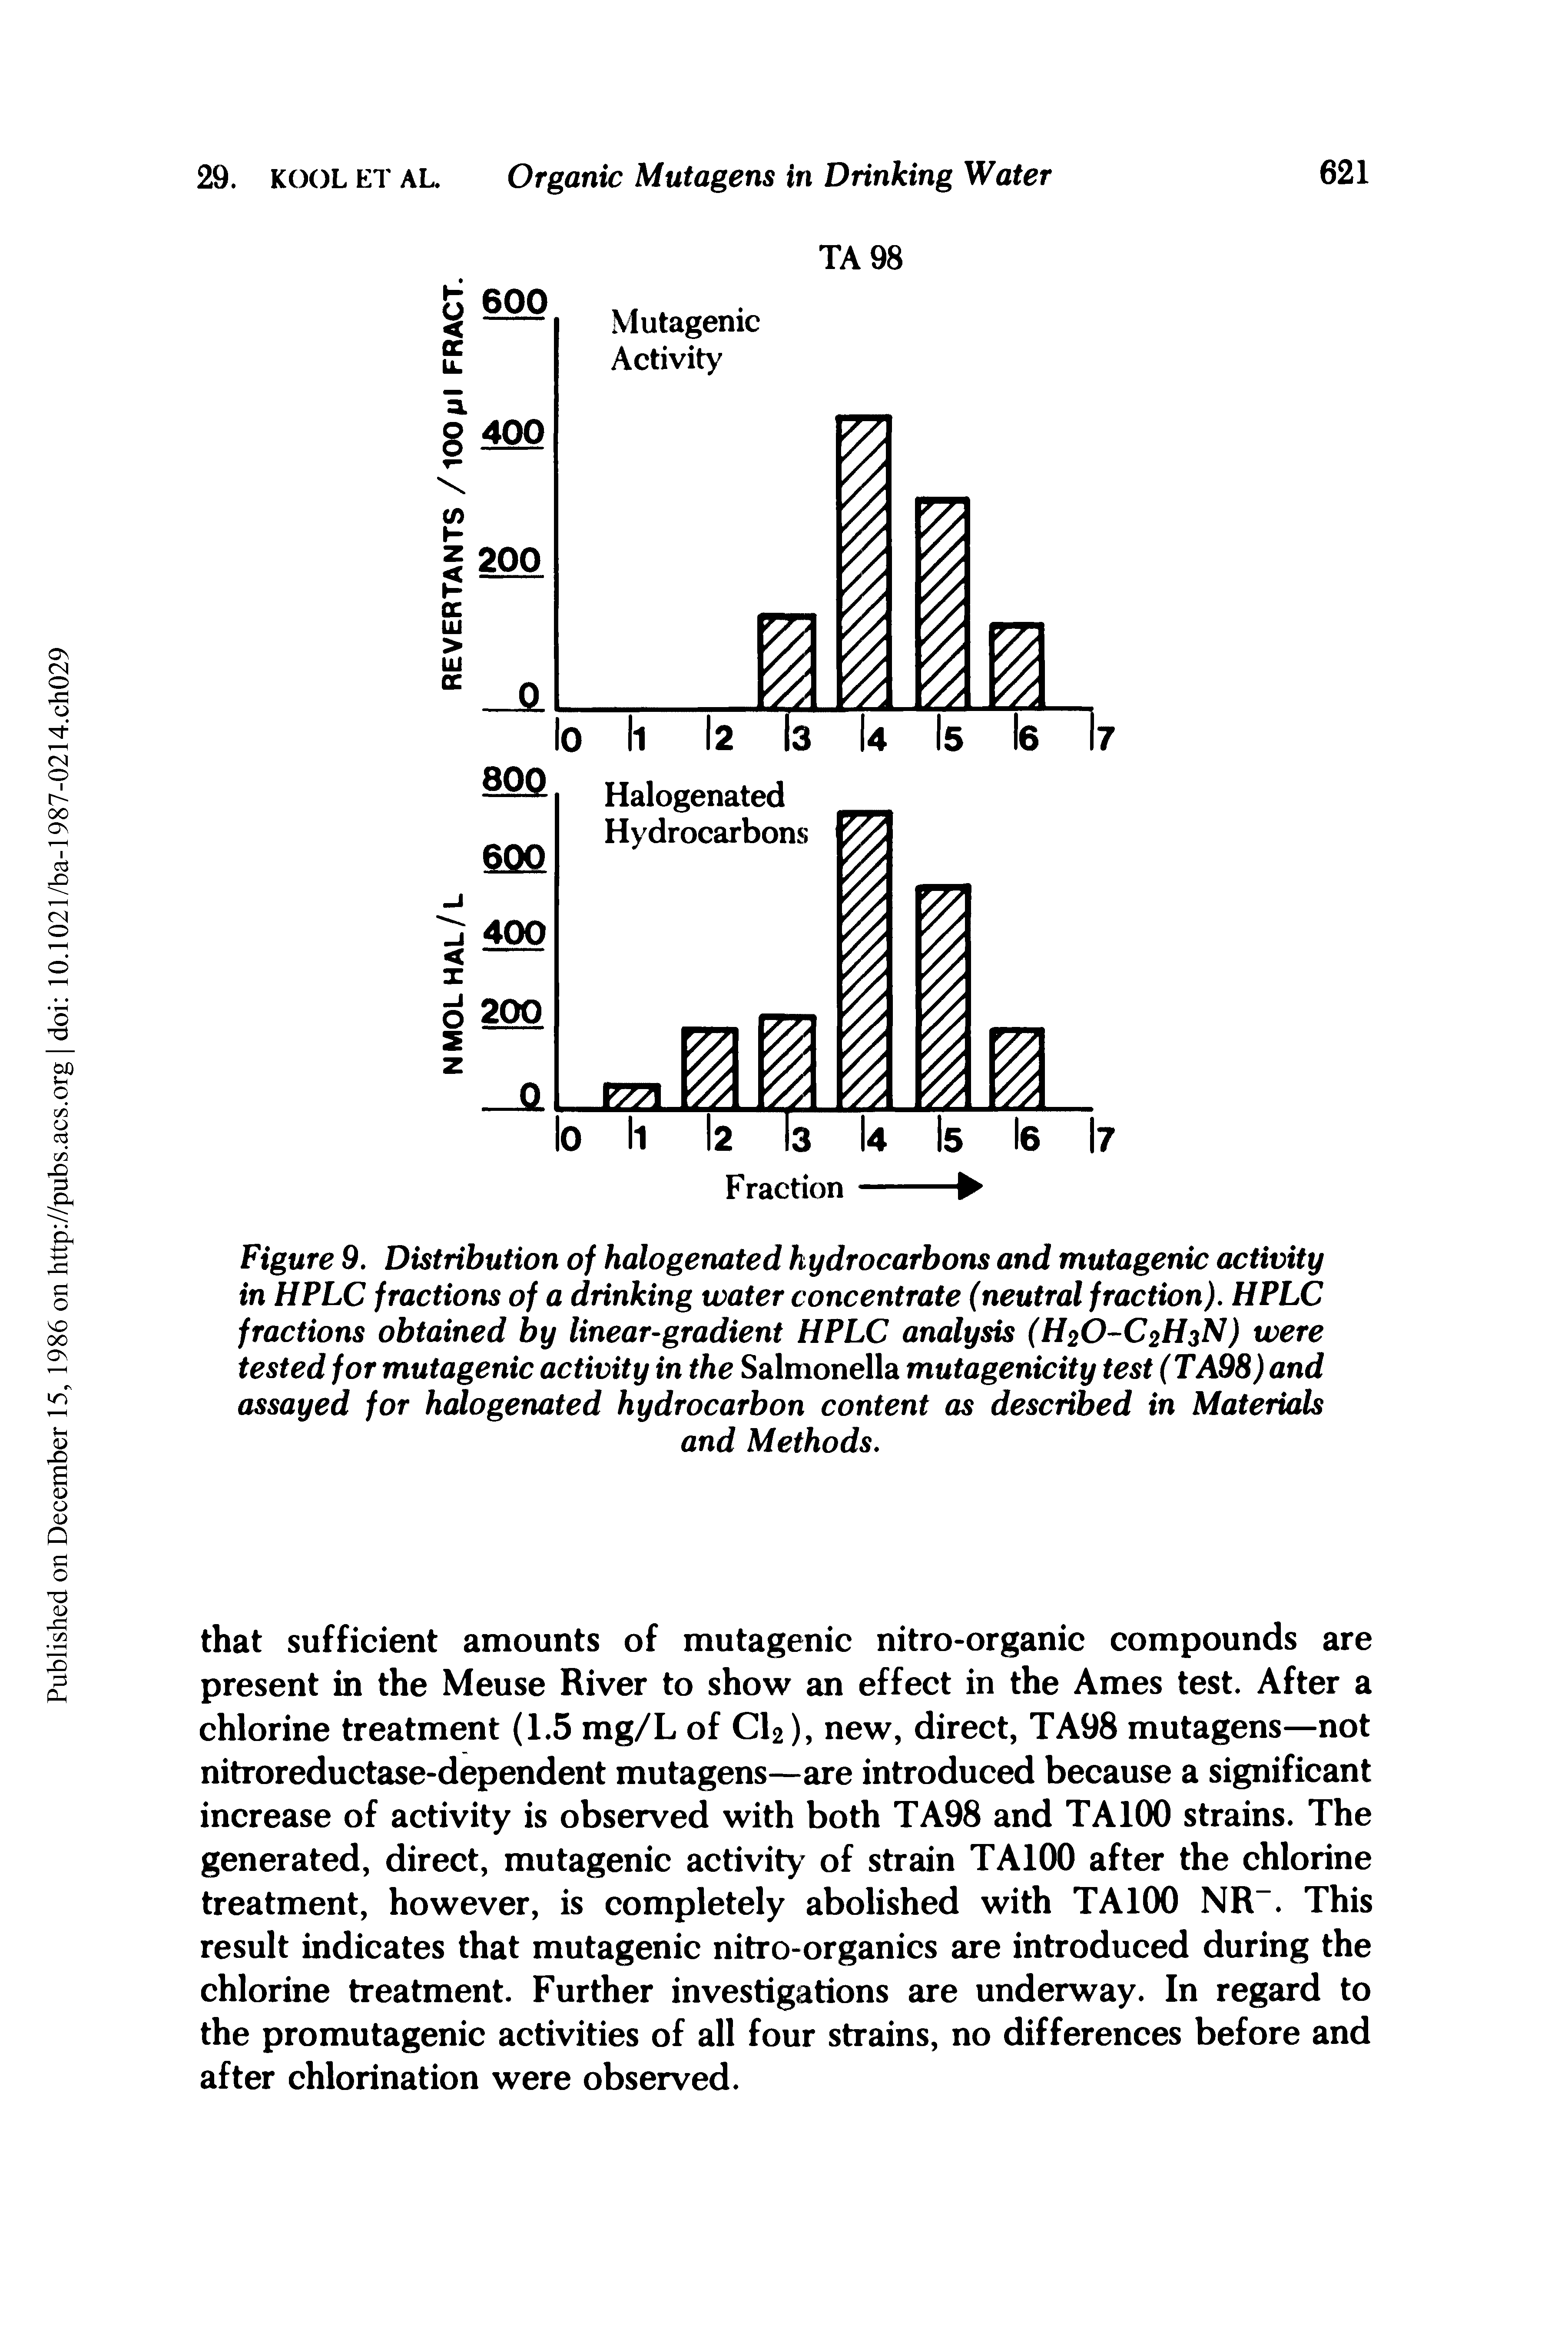 Figure 9. Distribution of halogenated hydrocarbons and mutagenic activity in HPLC fractions of a drinking water concentrate (neutral fraction). HPLC fractions obtained by linear-gradient HPLC analysis (H2O-C2H3N) were tested for mutagenic activity in the Salmonella mutagenicity test (TA98) and assayed for halogenated hydrocarbon content as described in Materials...